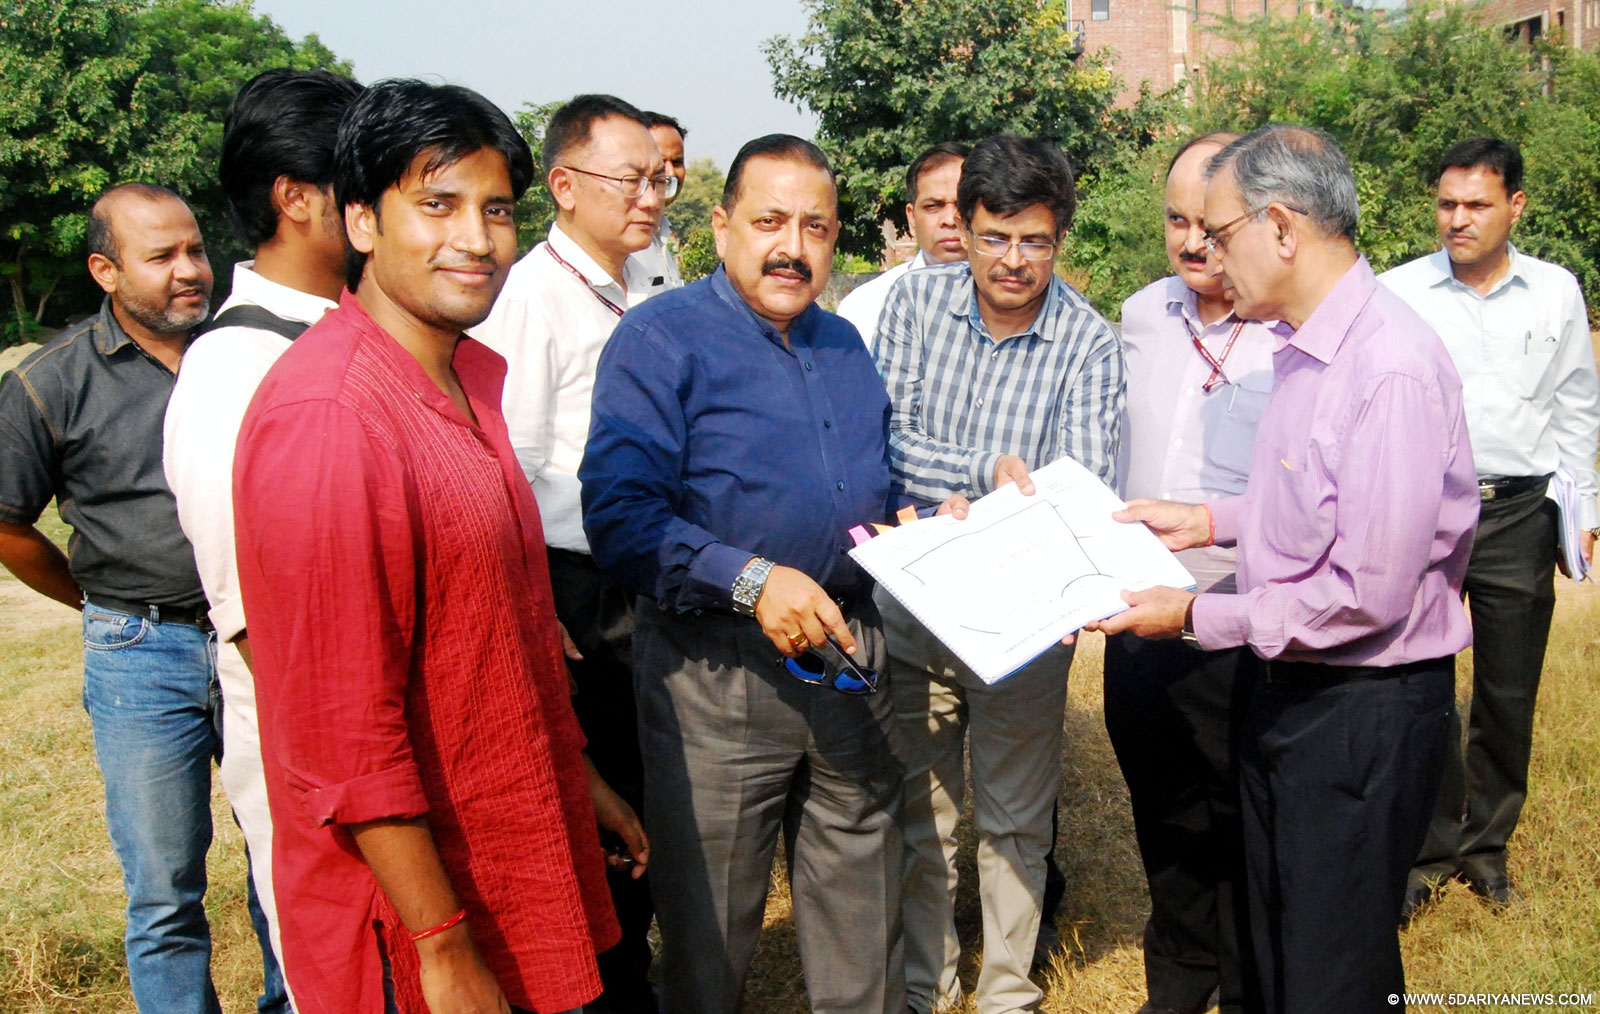 Dr. Jitendra Singh visiting the proposed site of Northeast students’ hostel in JNU campus, New Delhi on October 19, 2015. The Vice Chancellor, Jawaharlal Nehru University (JNU), Prof. S.K. Sopory, the Secretary, DoNER, Shri Ameising Luikham and other senior officials are also seen.